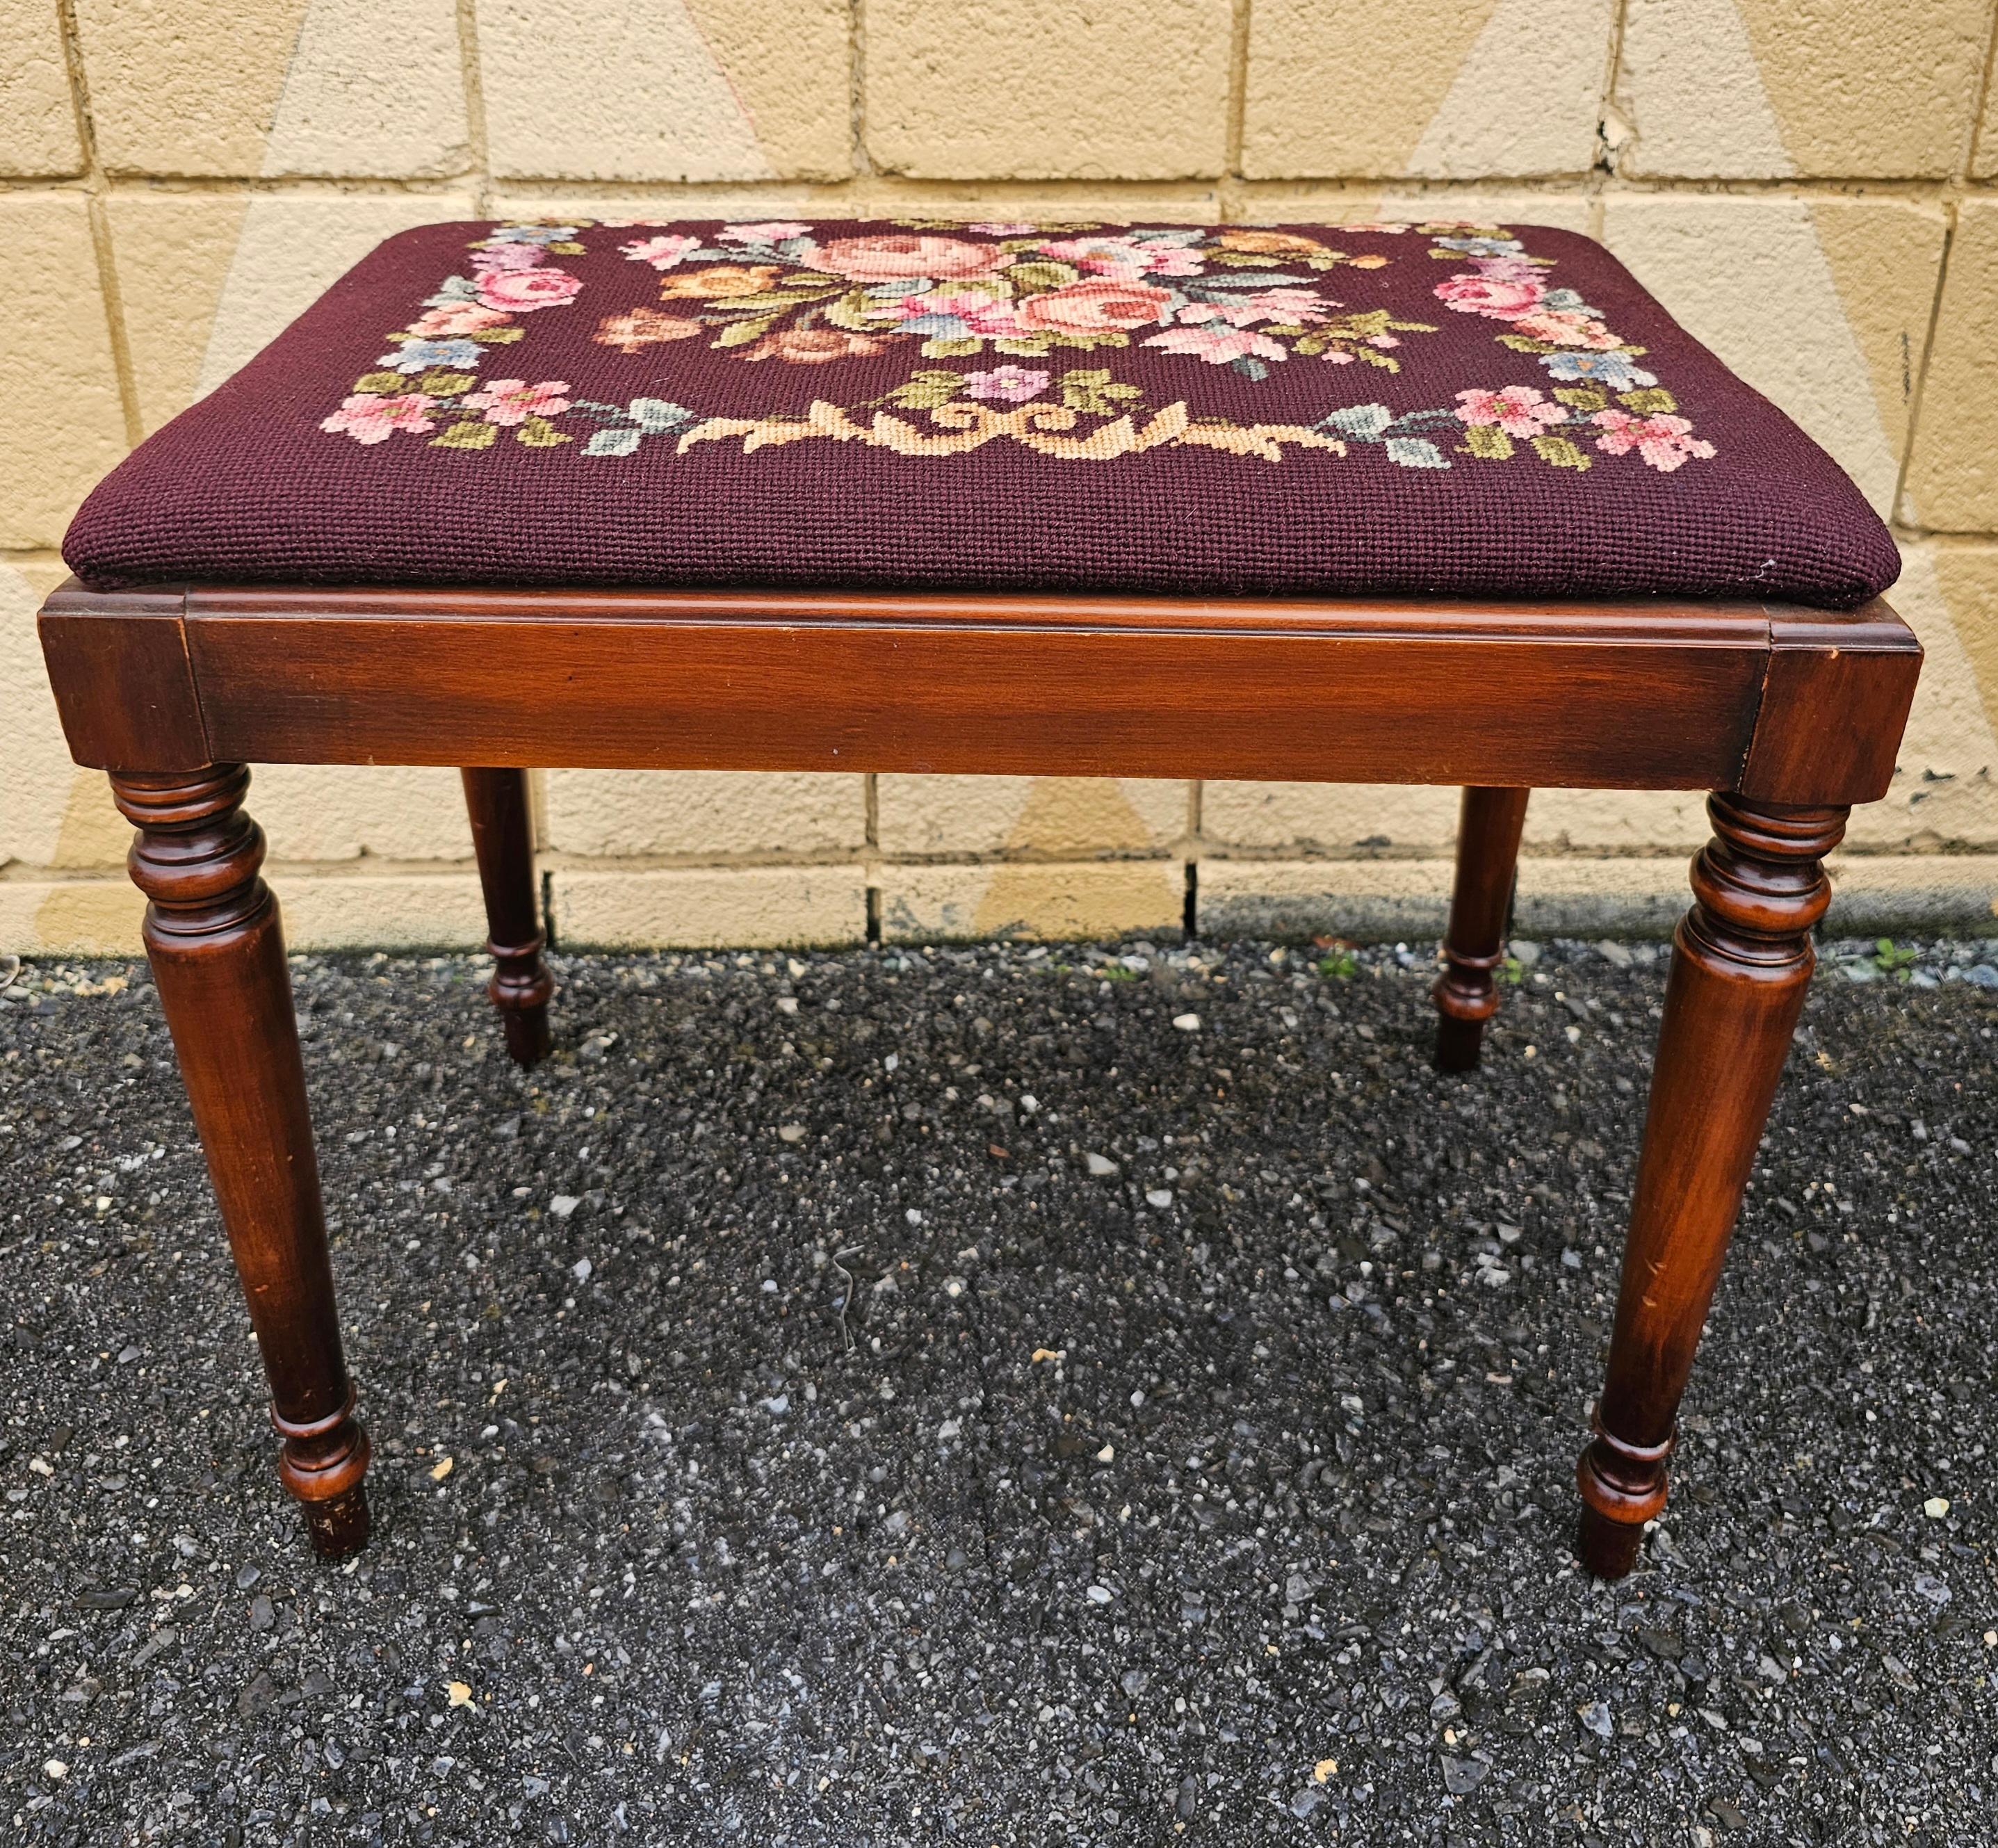 Mid 20th Century Kindel Furniture Oxford Cherry & Needlepoint Upholstered Bench For Sale 2